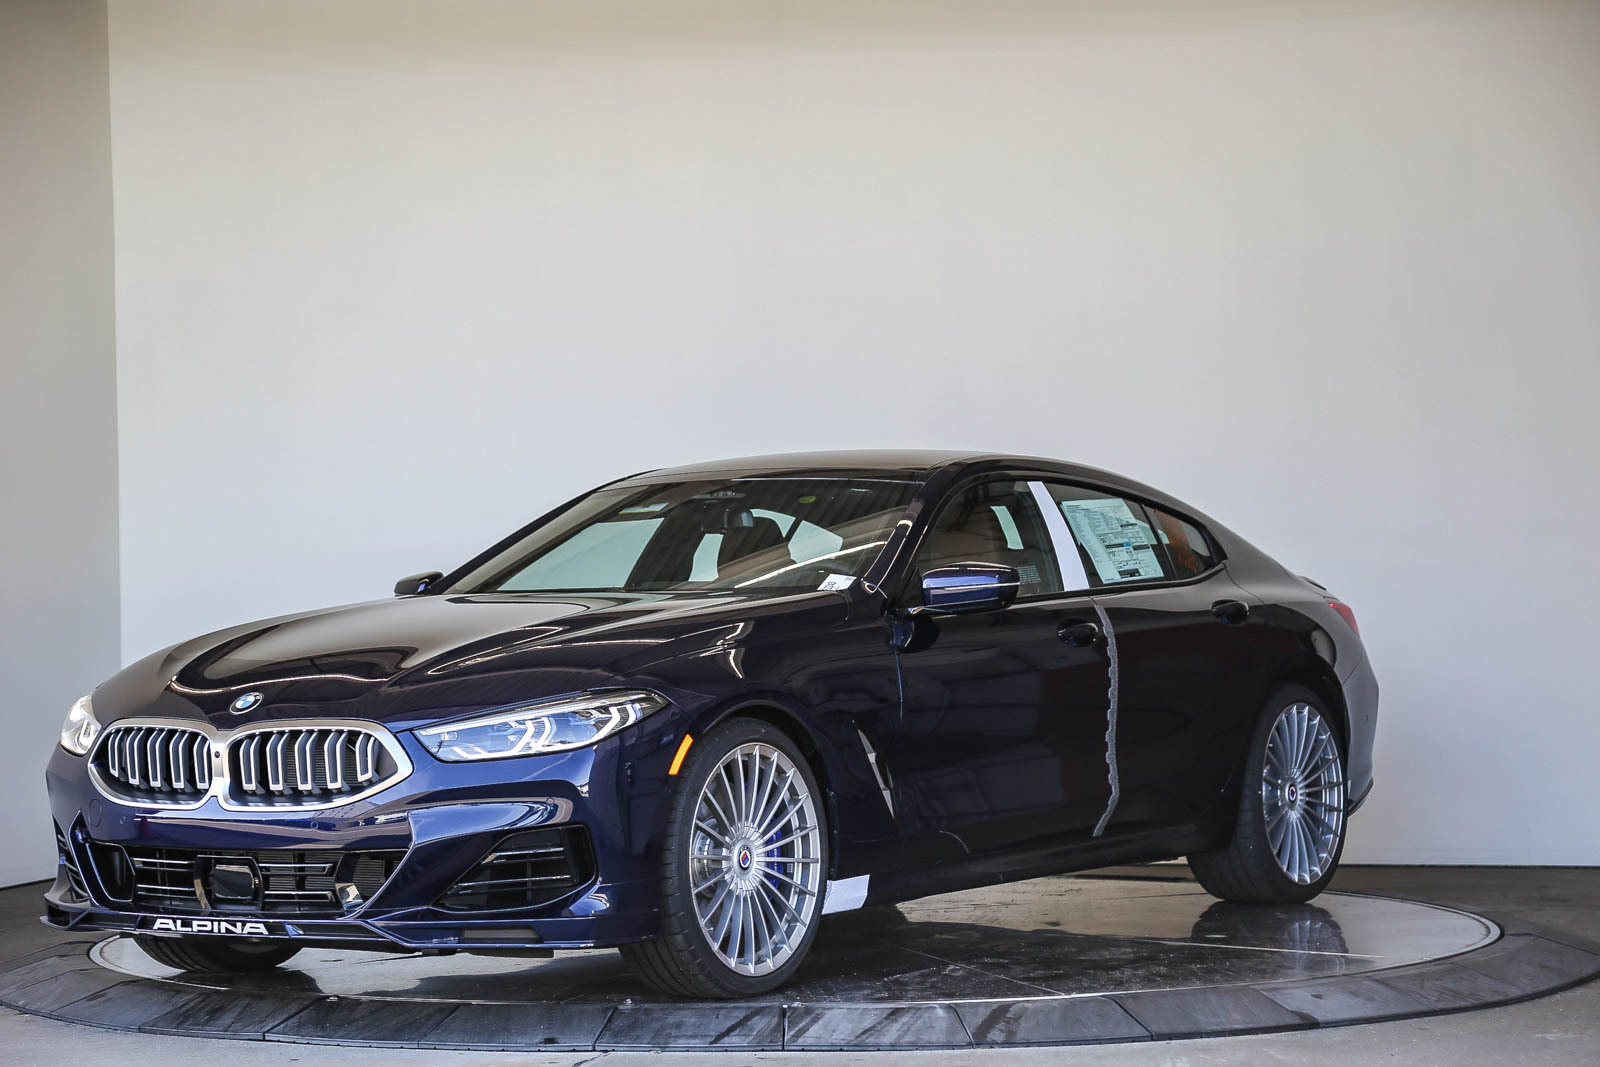 New 2023 BMW 8 Series ALPINA B8 xDrive Gran Coupe 4dr Car in Glendale  #222245 | Pacific BMW